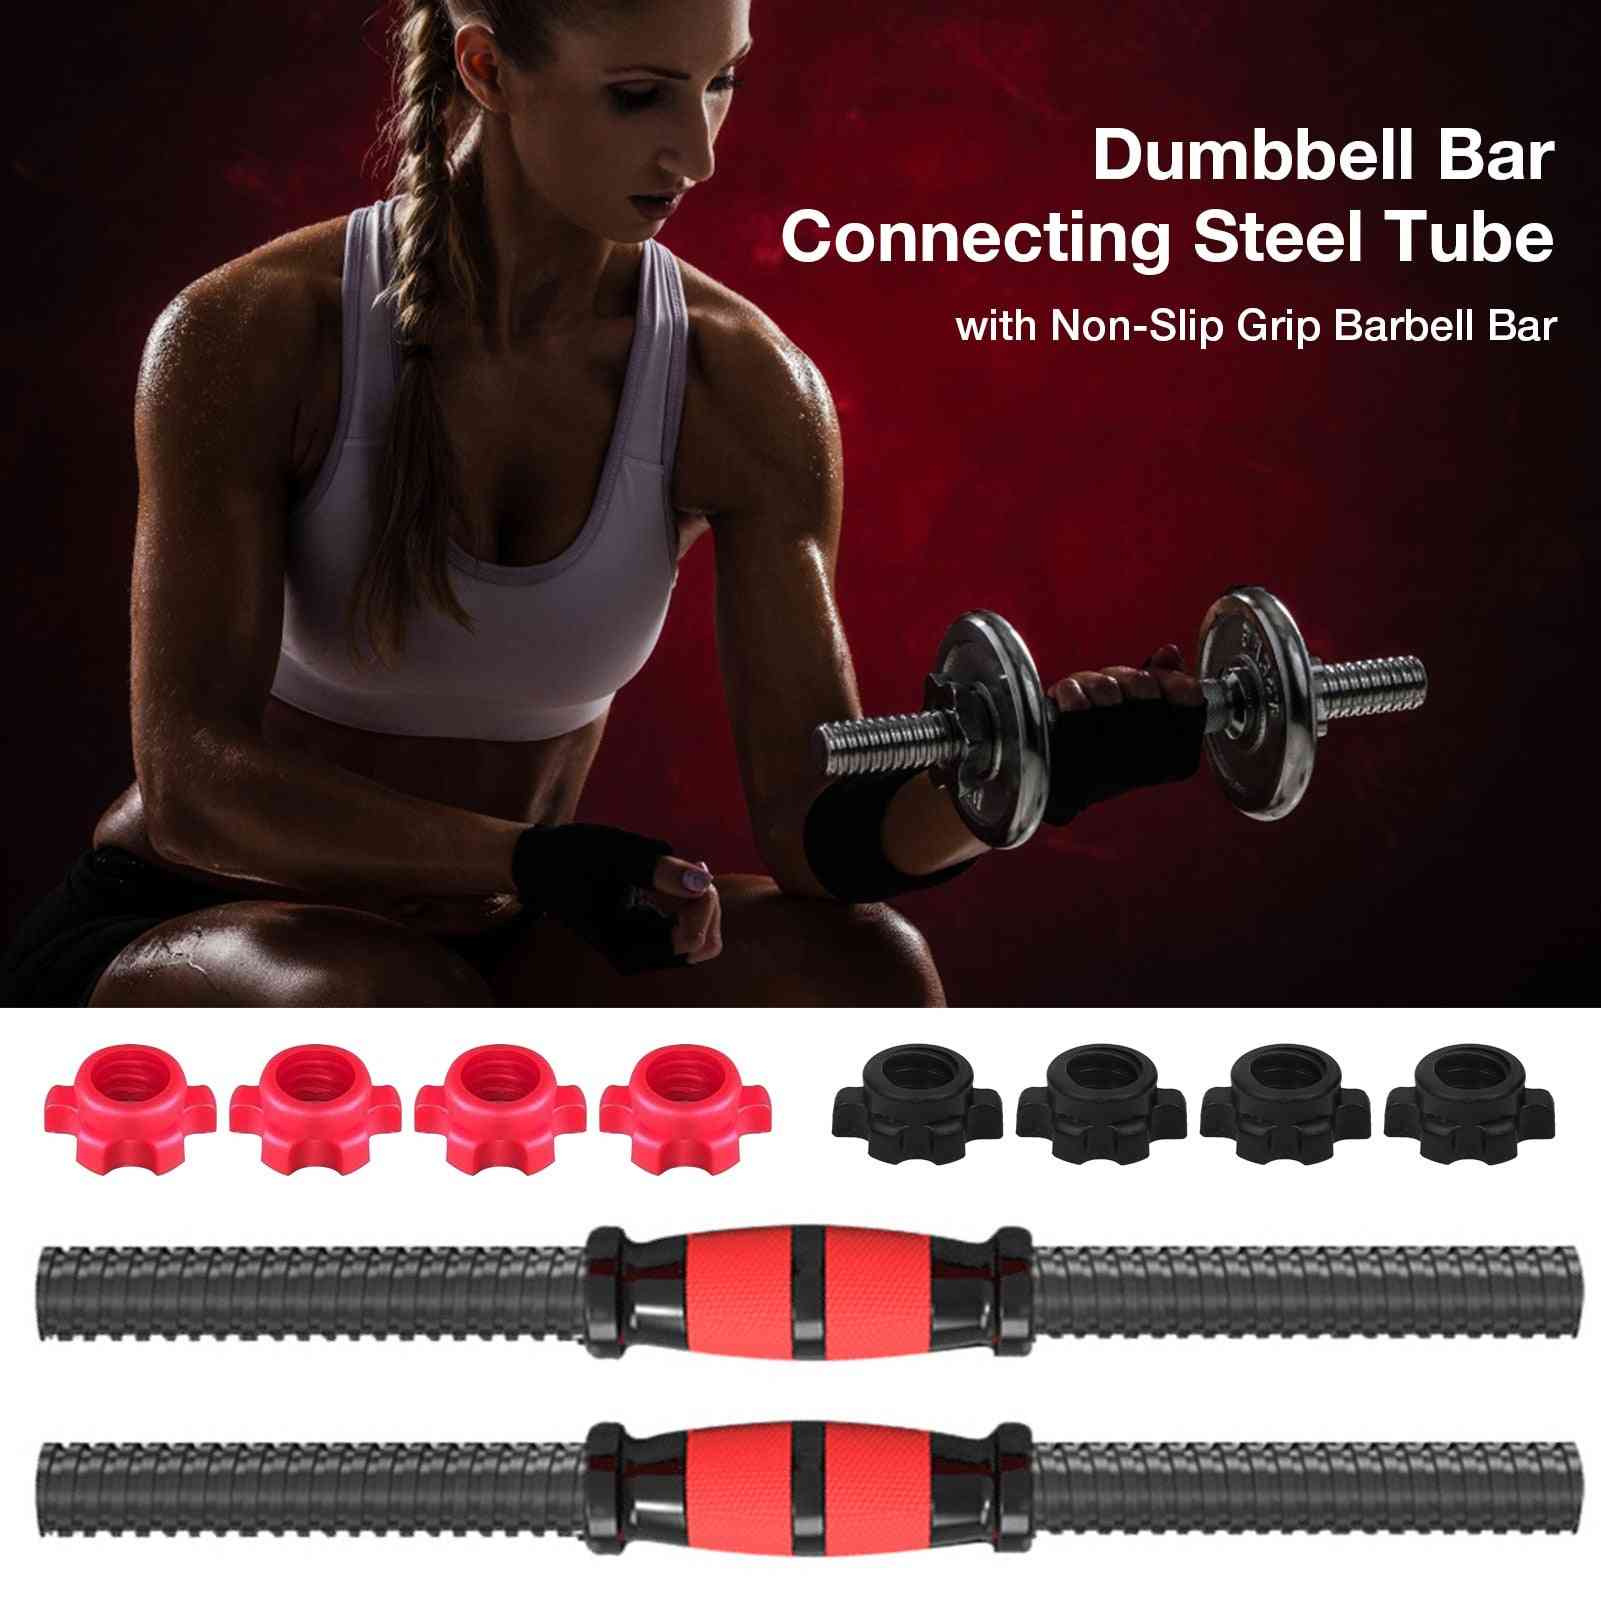 Bar Set Dumbbell Barbell Collar Clips Connecting Steel Tube